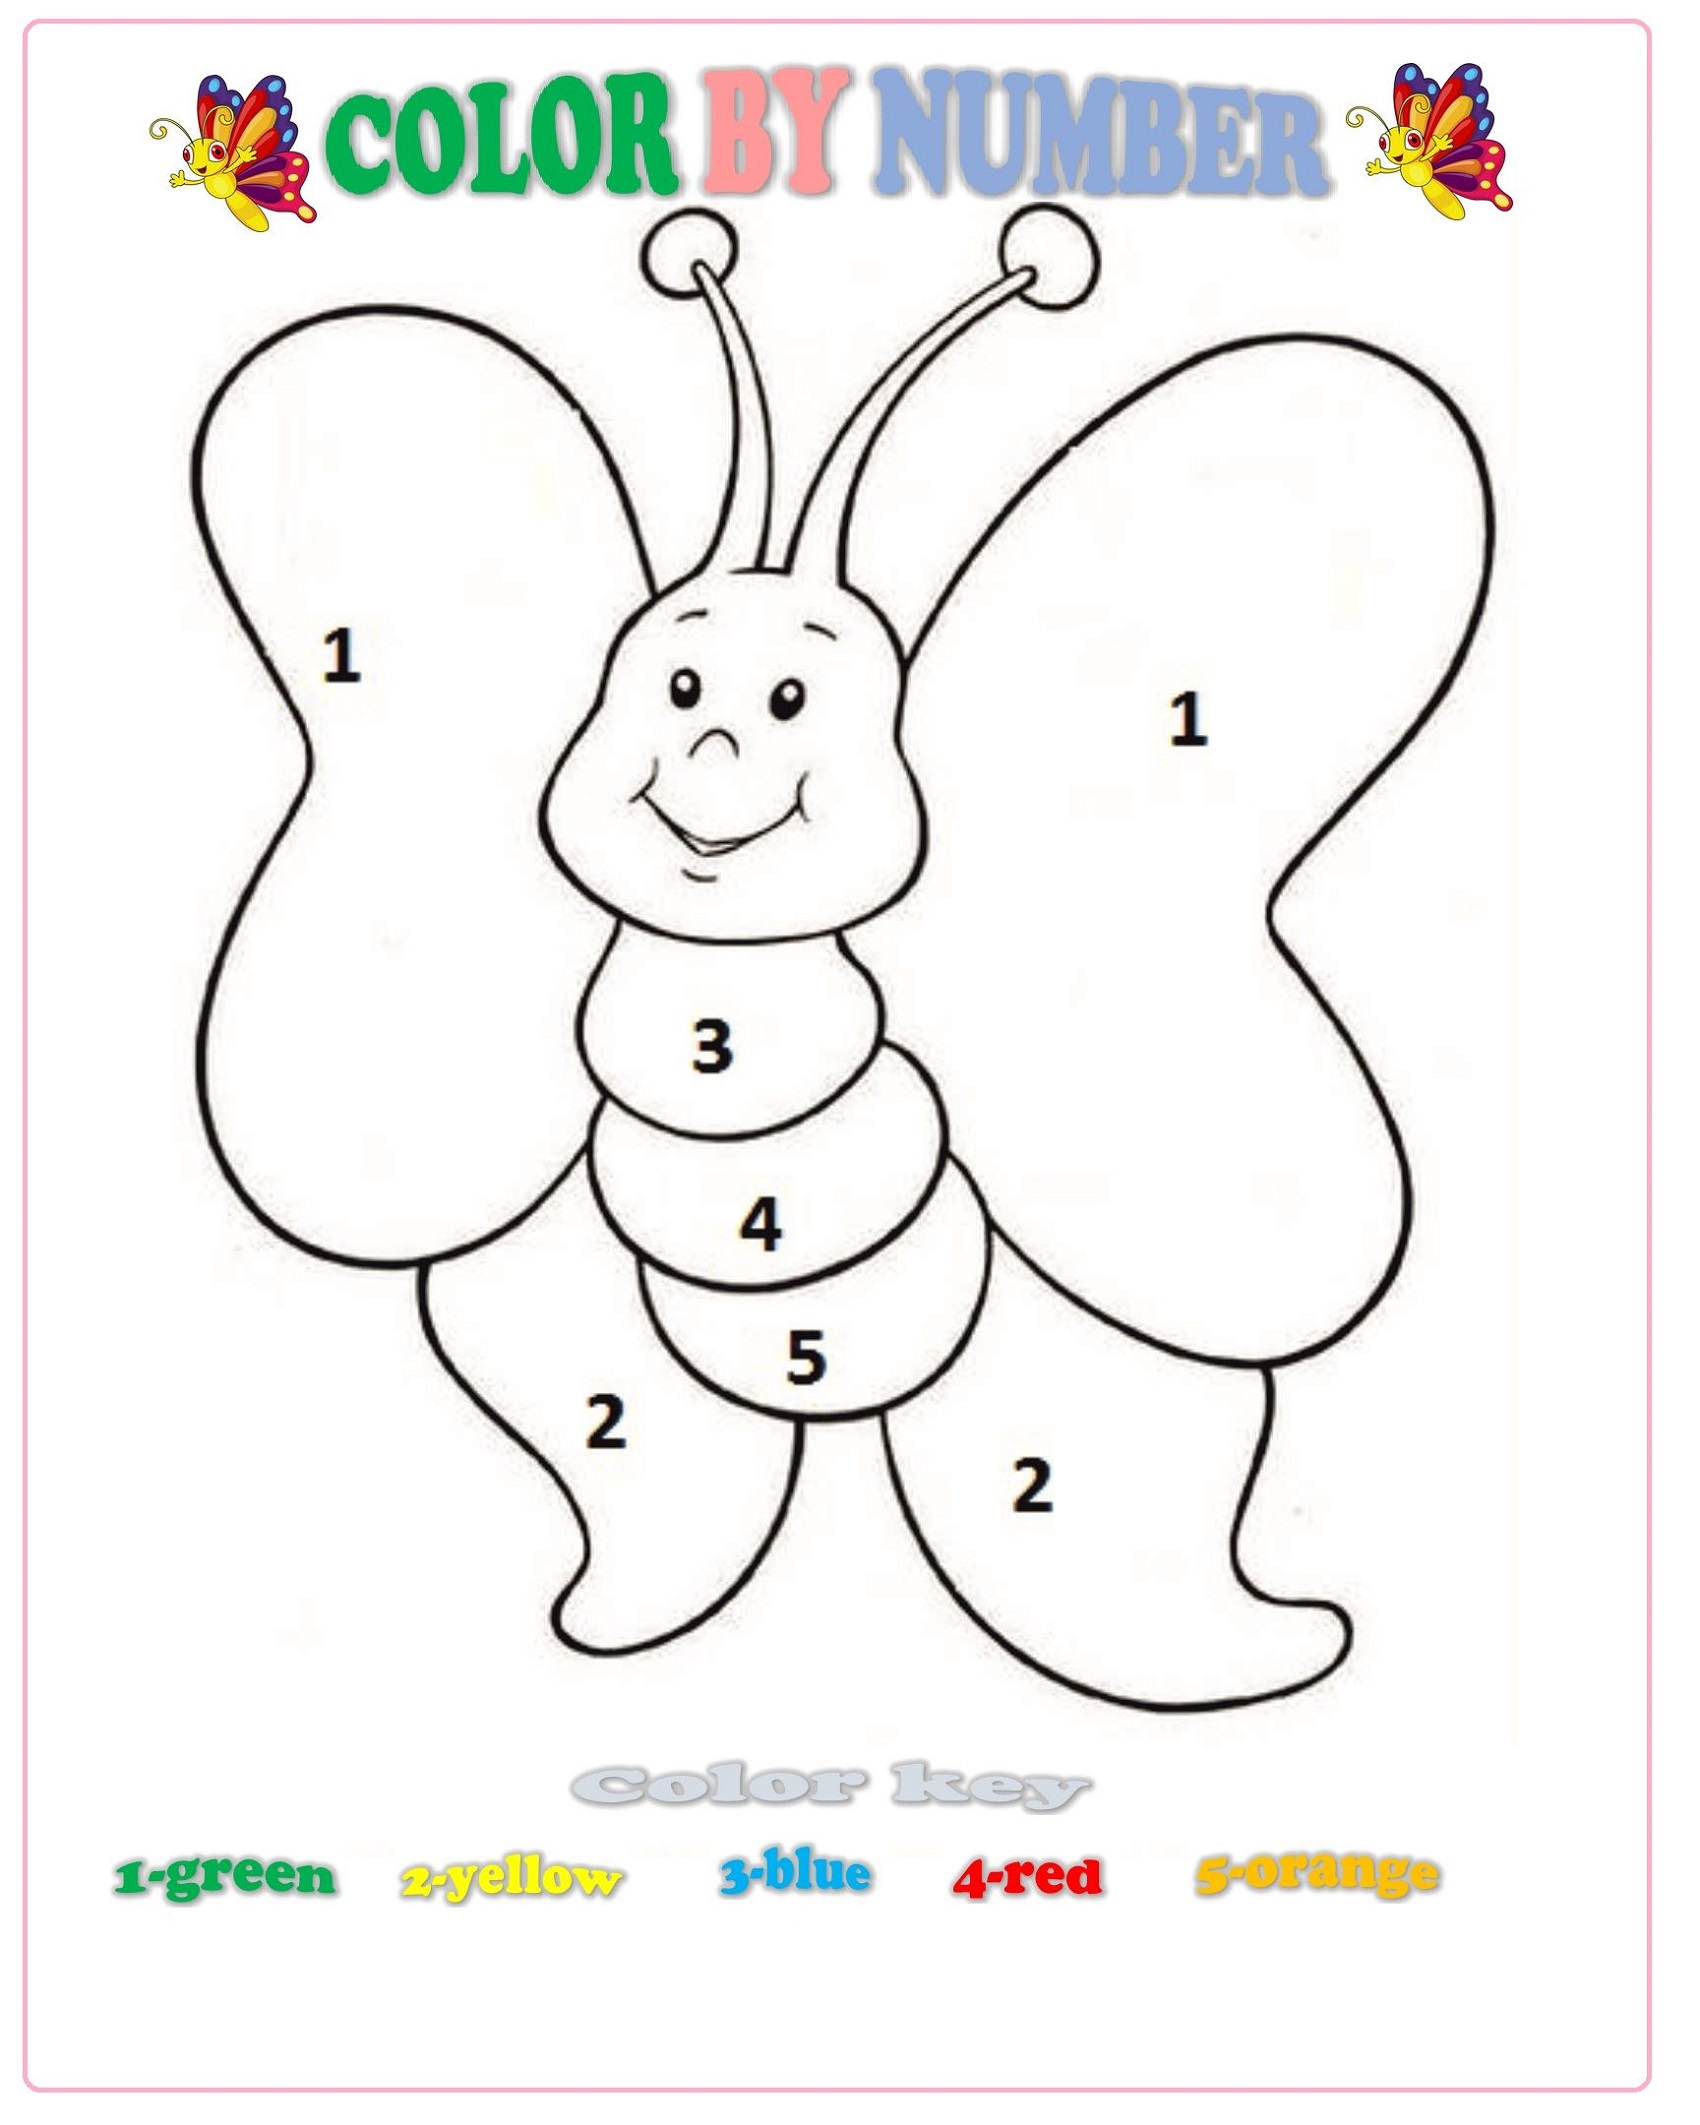 fun-color-by-numbers-for-kids-101-coloring